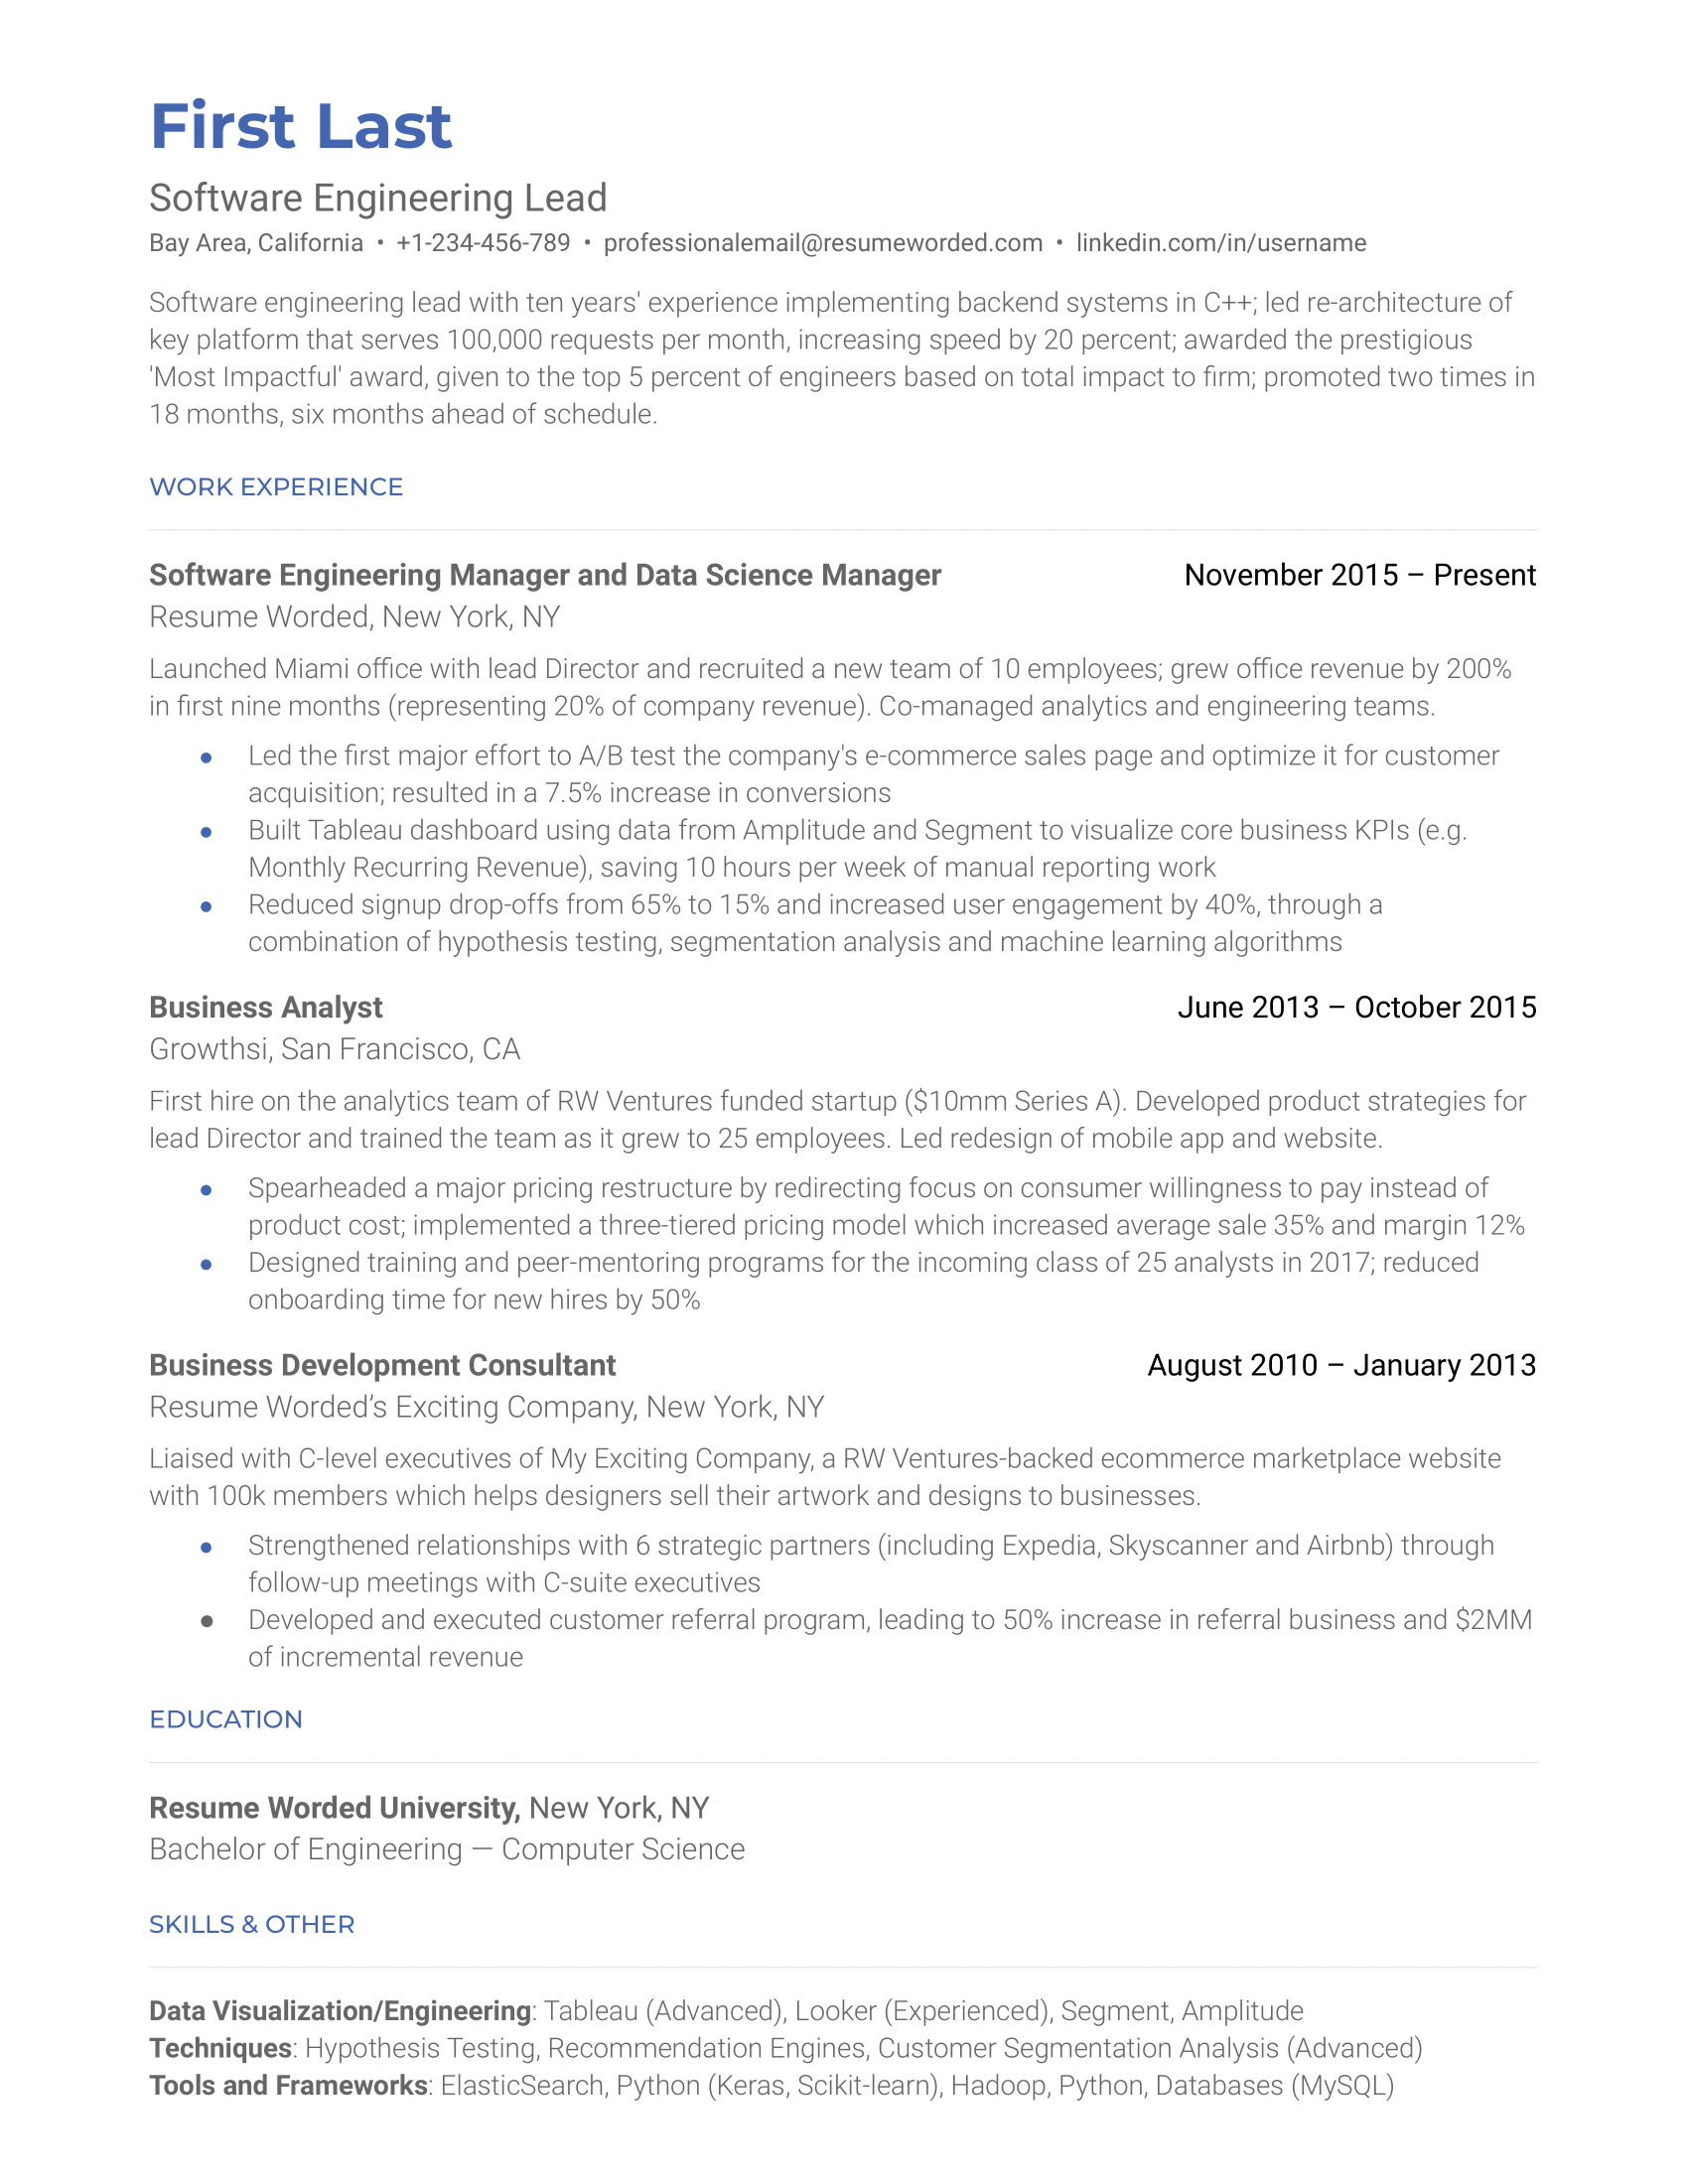 A snapshot of a CV featuring leadership and advanced technical skills for a software engineering lead role.